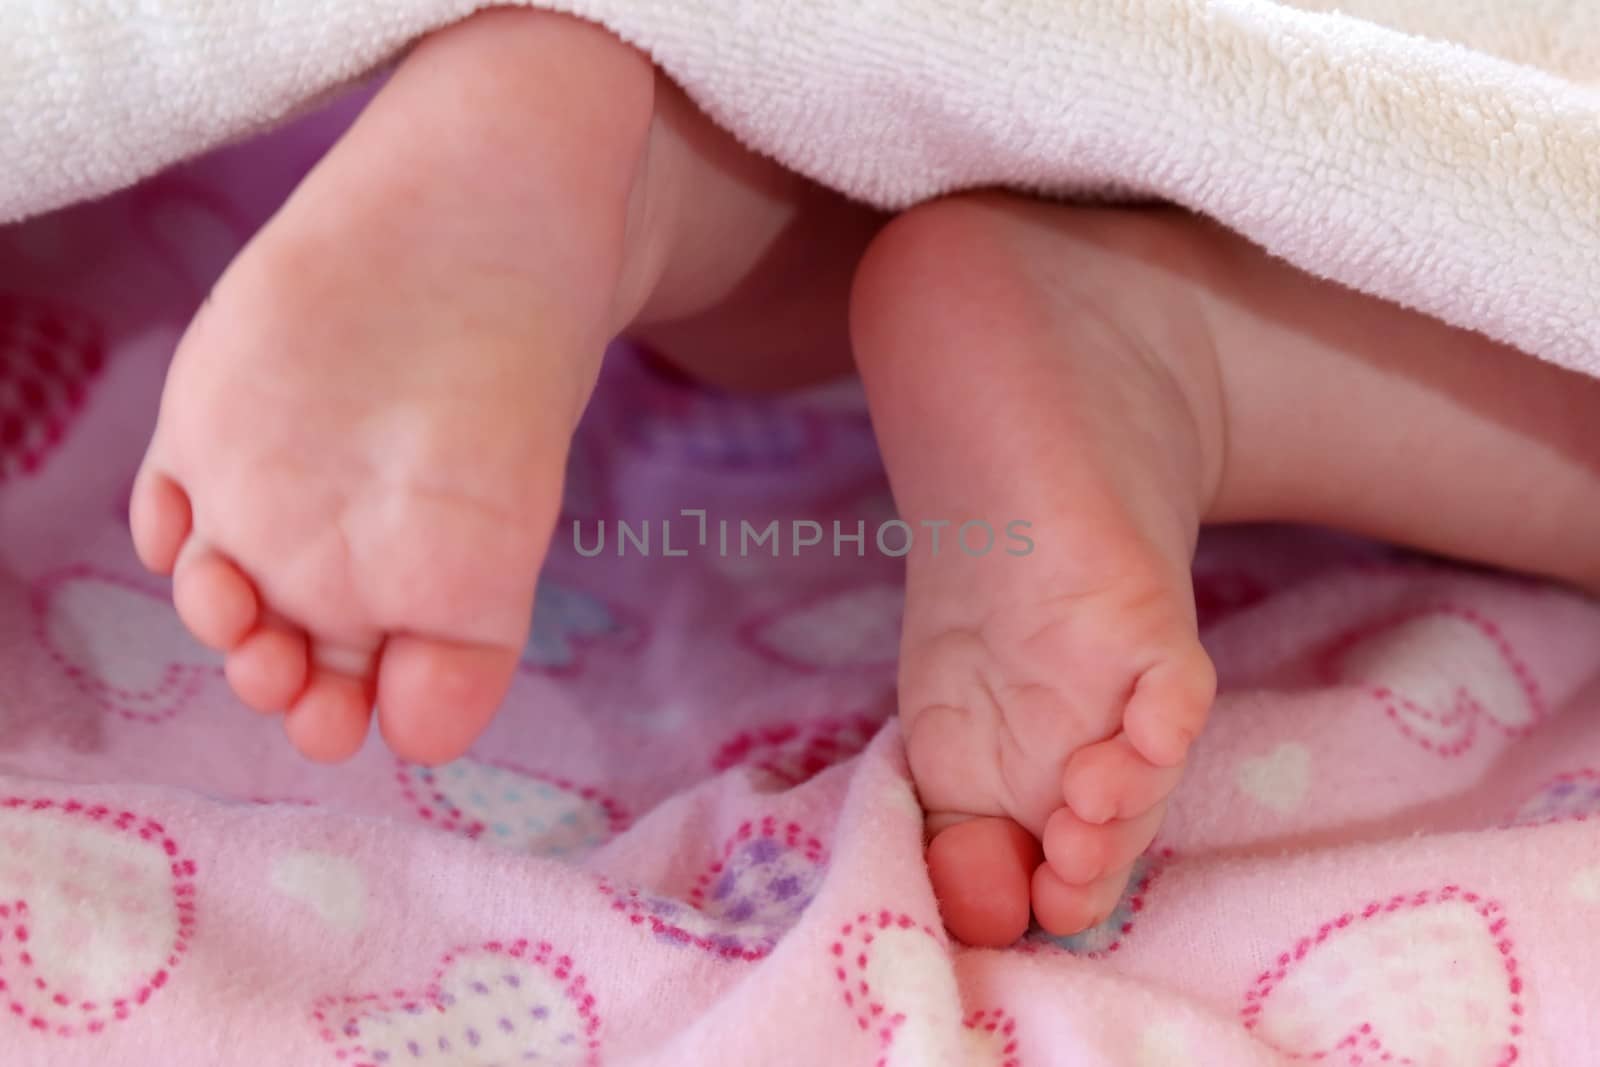 Baby's cute feet against a pink background